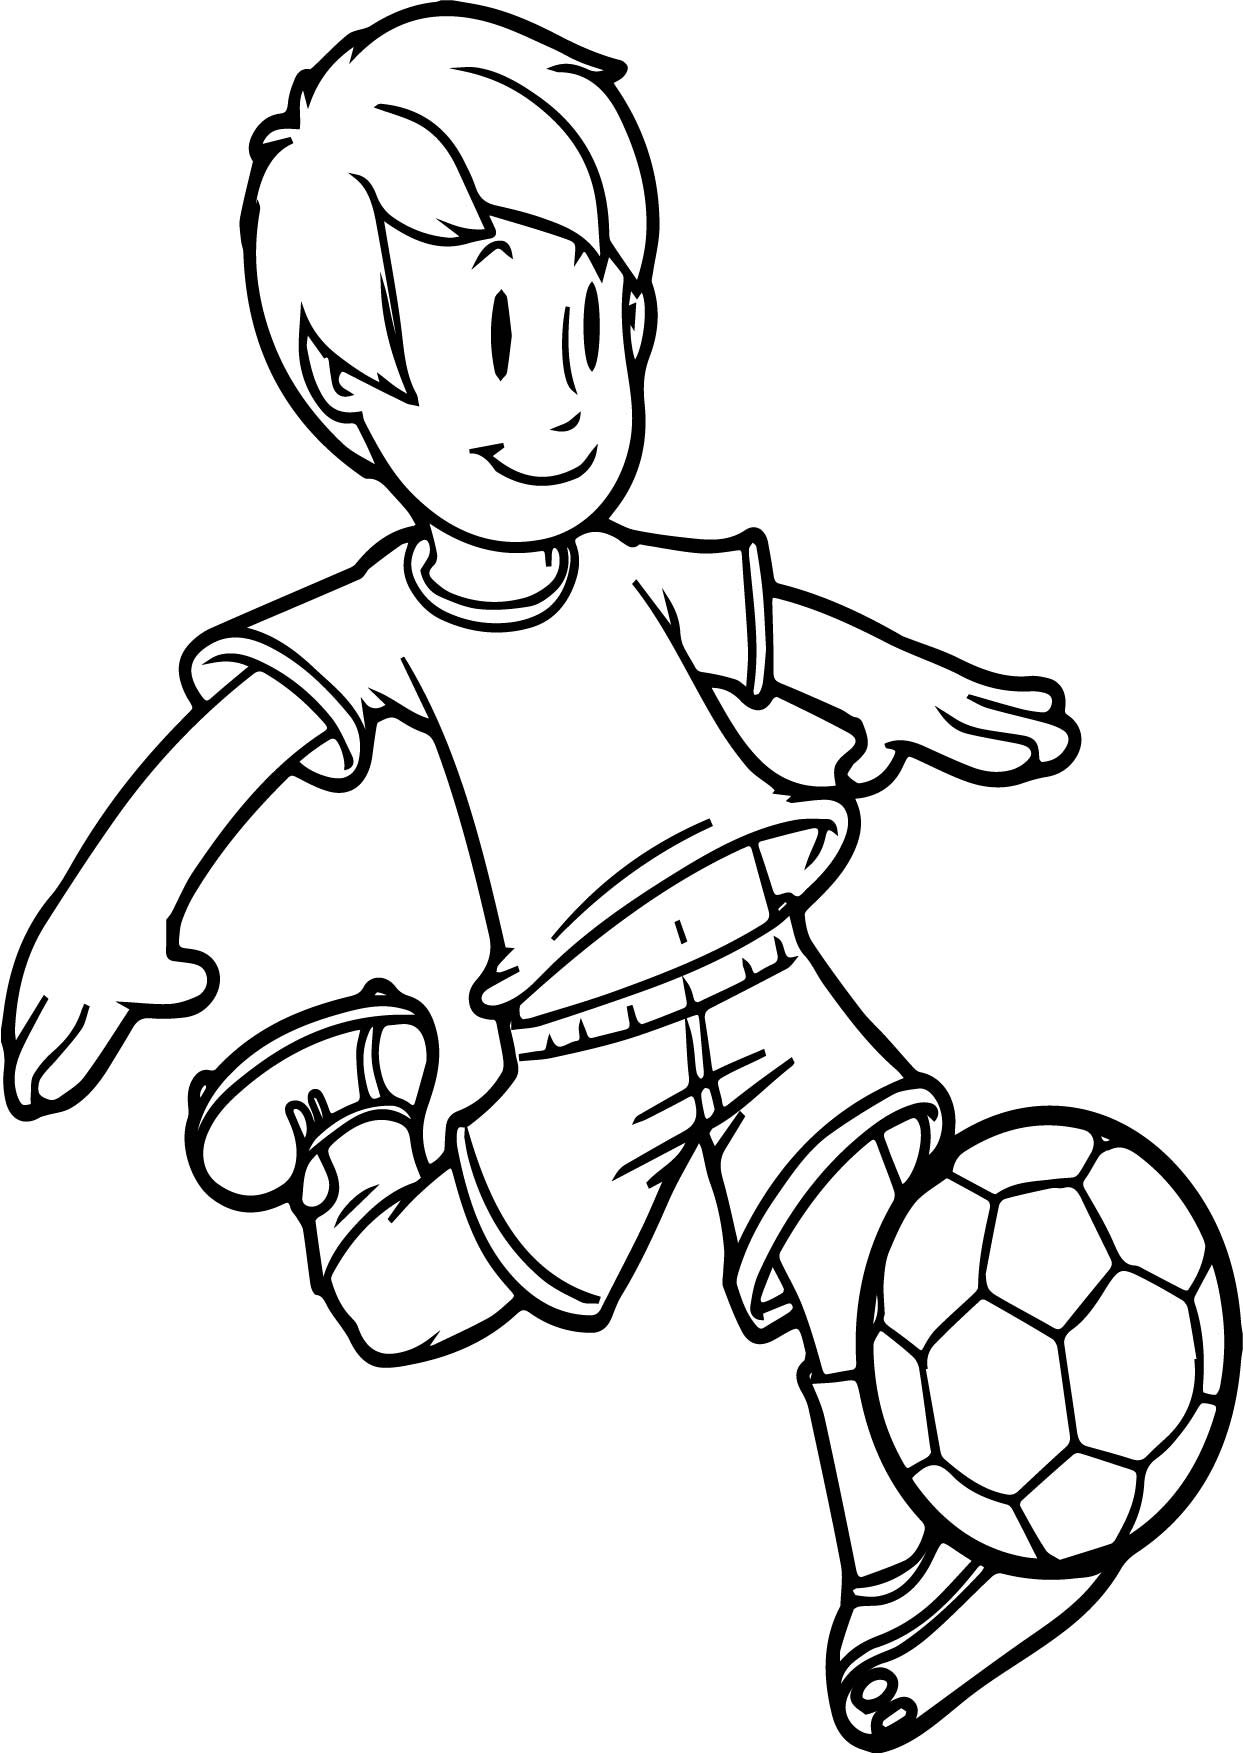 cartoon-boy-coloring-pages-at-getcolorings-free-printable-colorings-pages-to-print-and-color